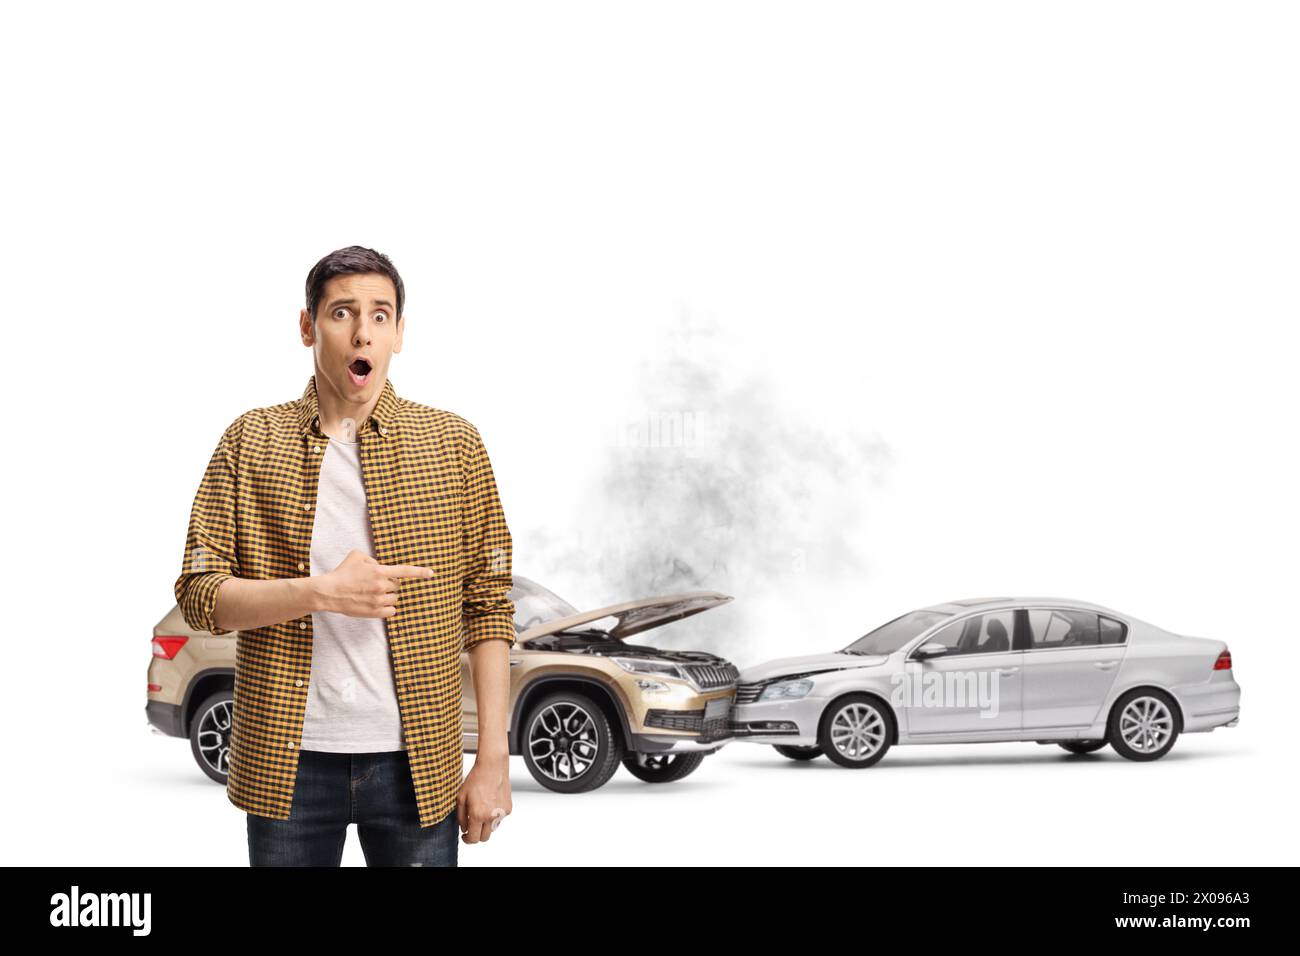 Shocked young man pointing at car collision isolated on white background Stock Photo